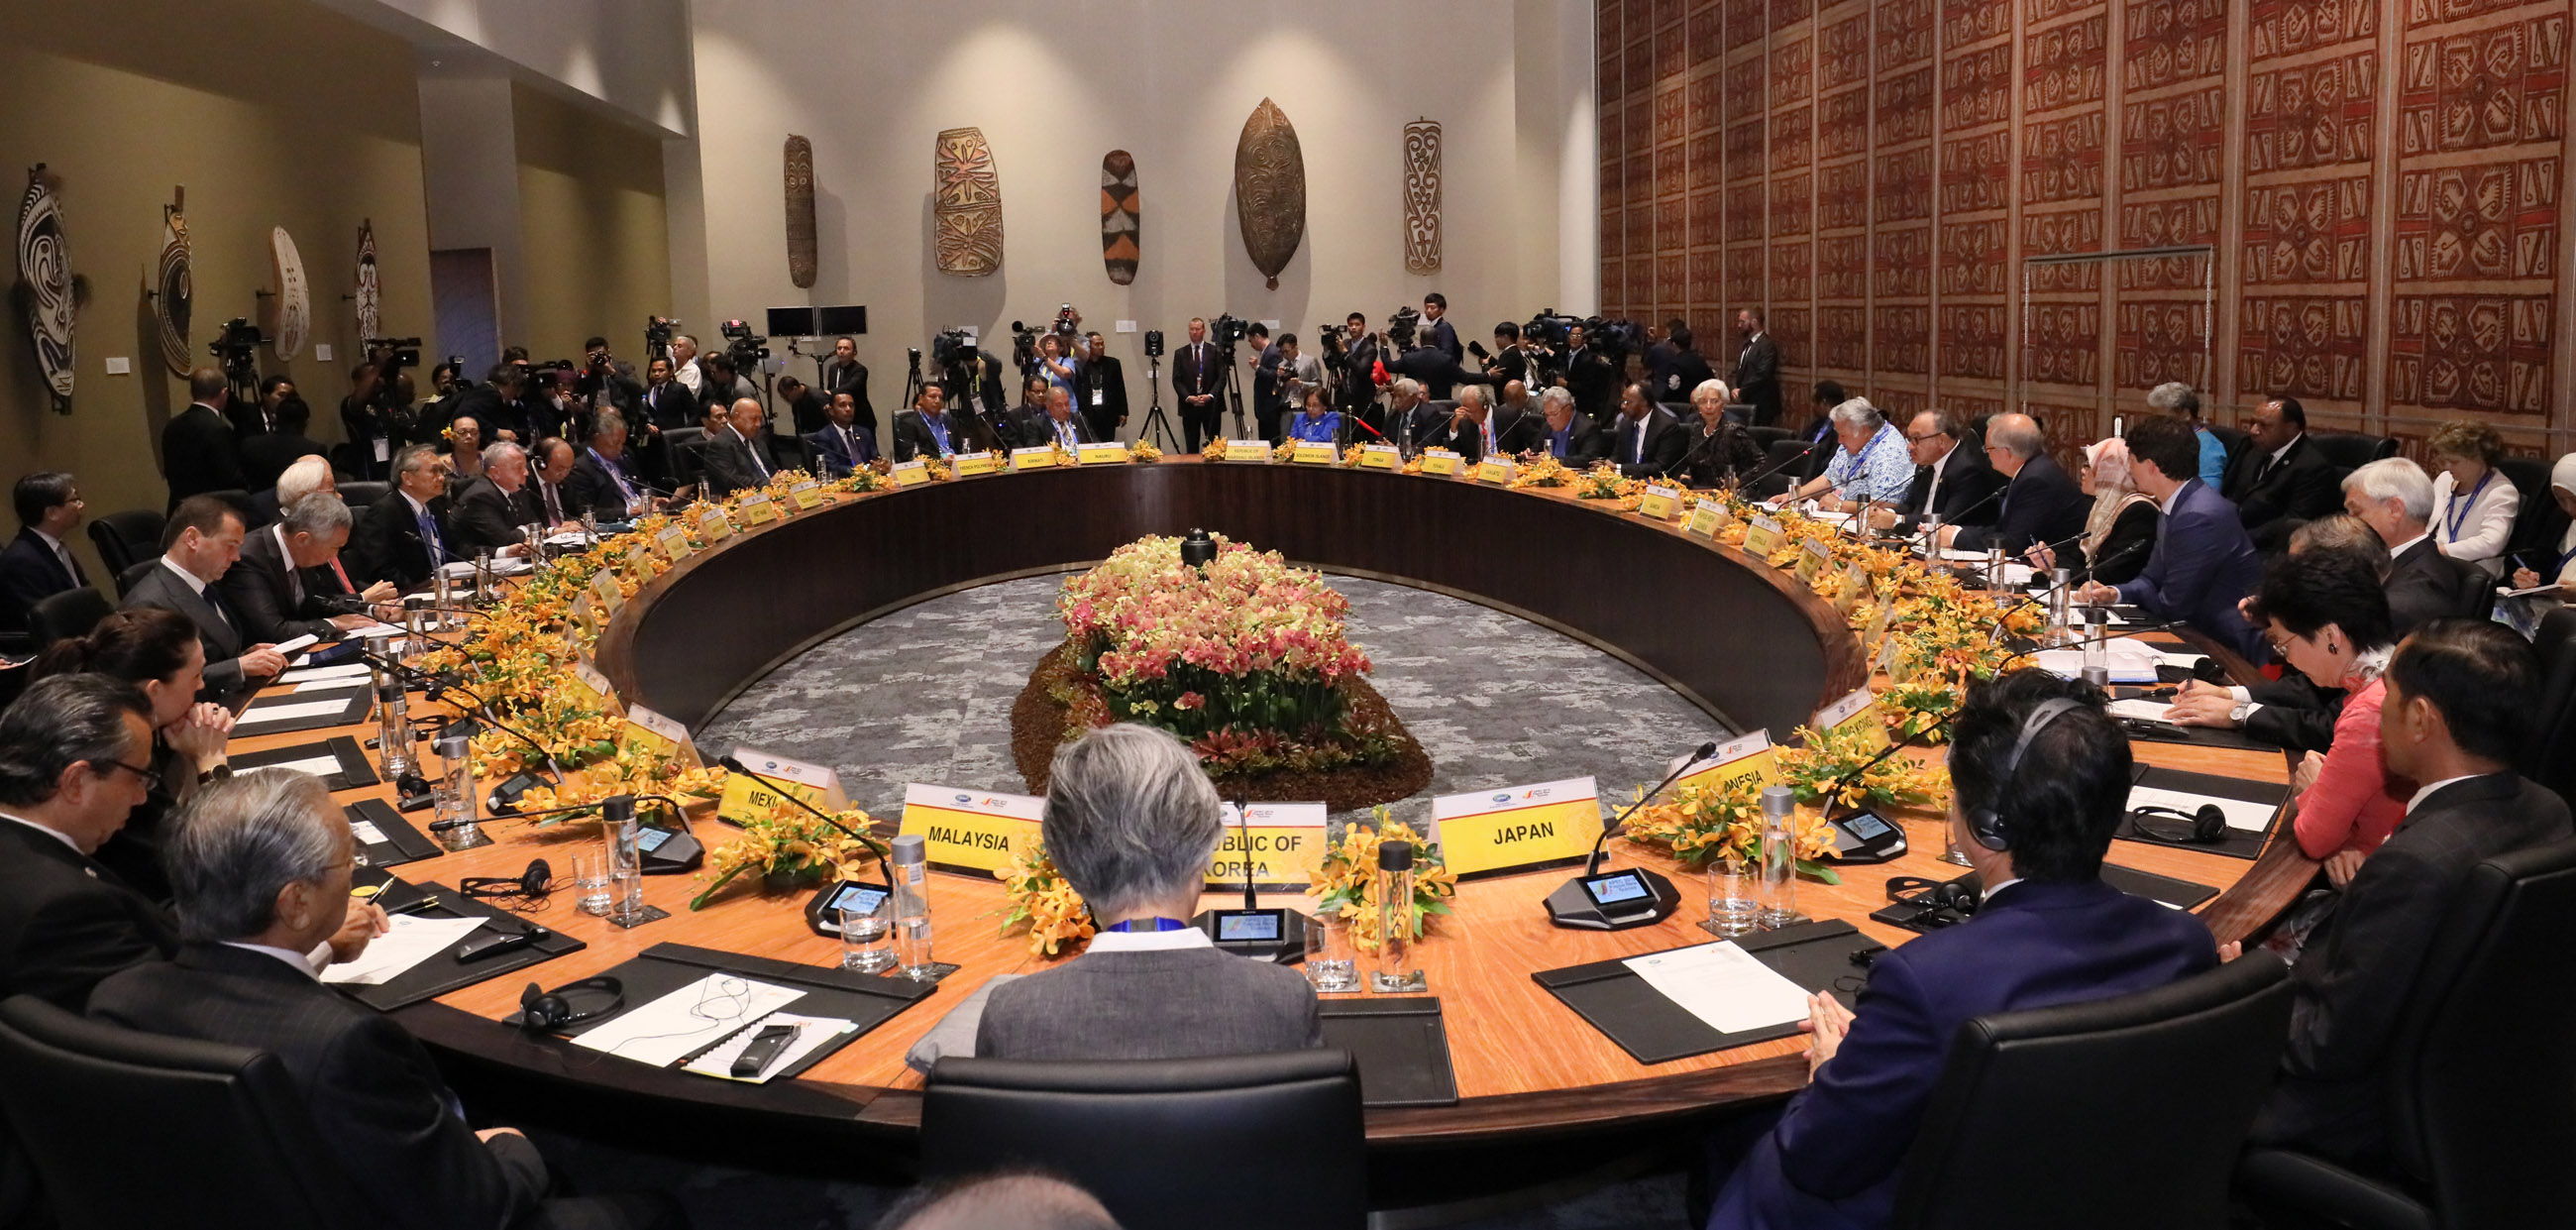 Photograph of the APEC Leaders’ Dialogue with Pacific Island Leaders